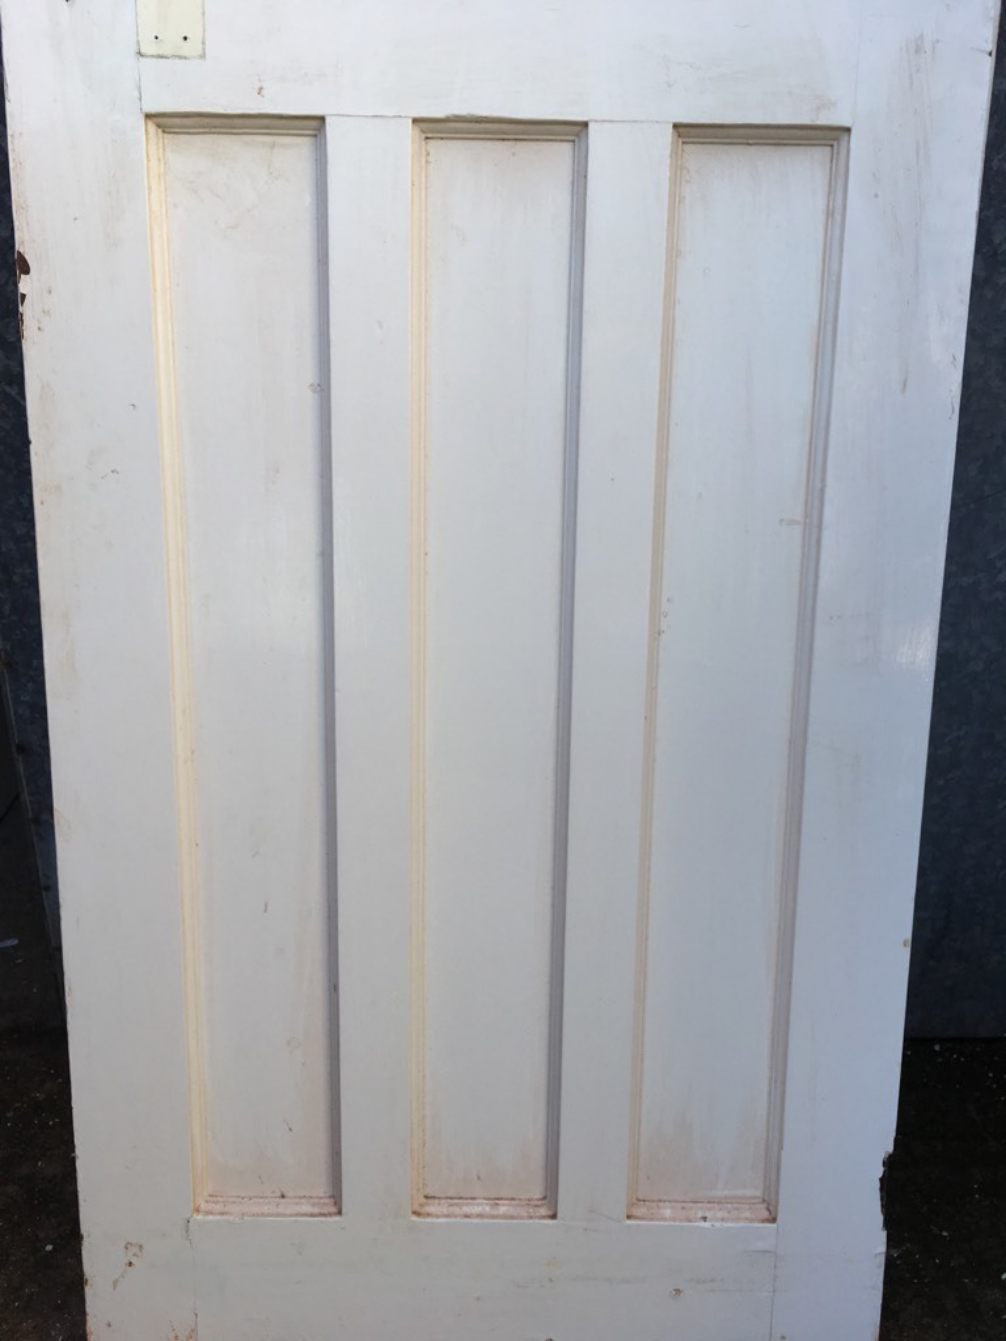 29 5/8”x77 3/8” 1930s Painted Pitch Pine Four Panel 1 Over 3 Internal Door